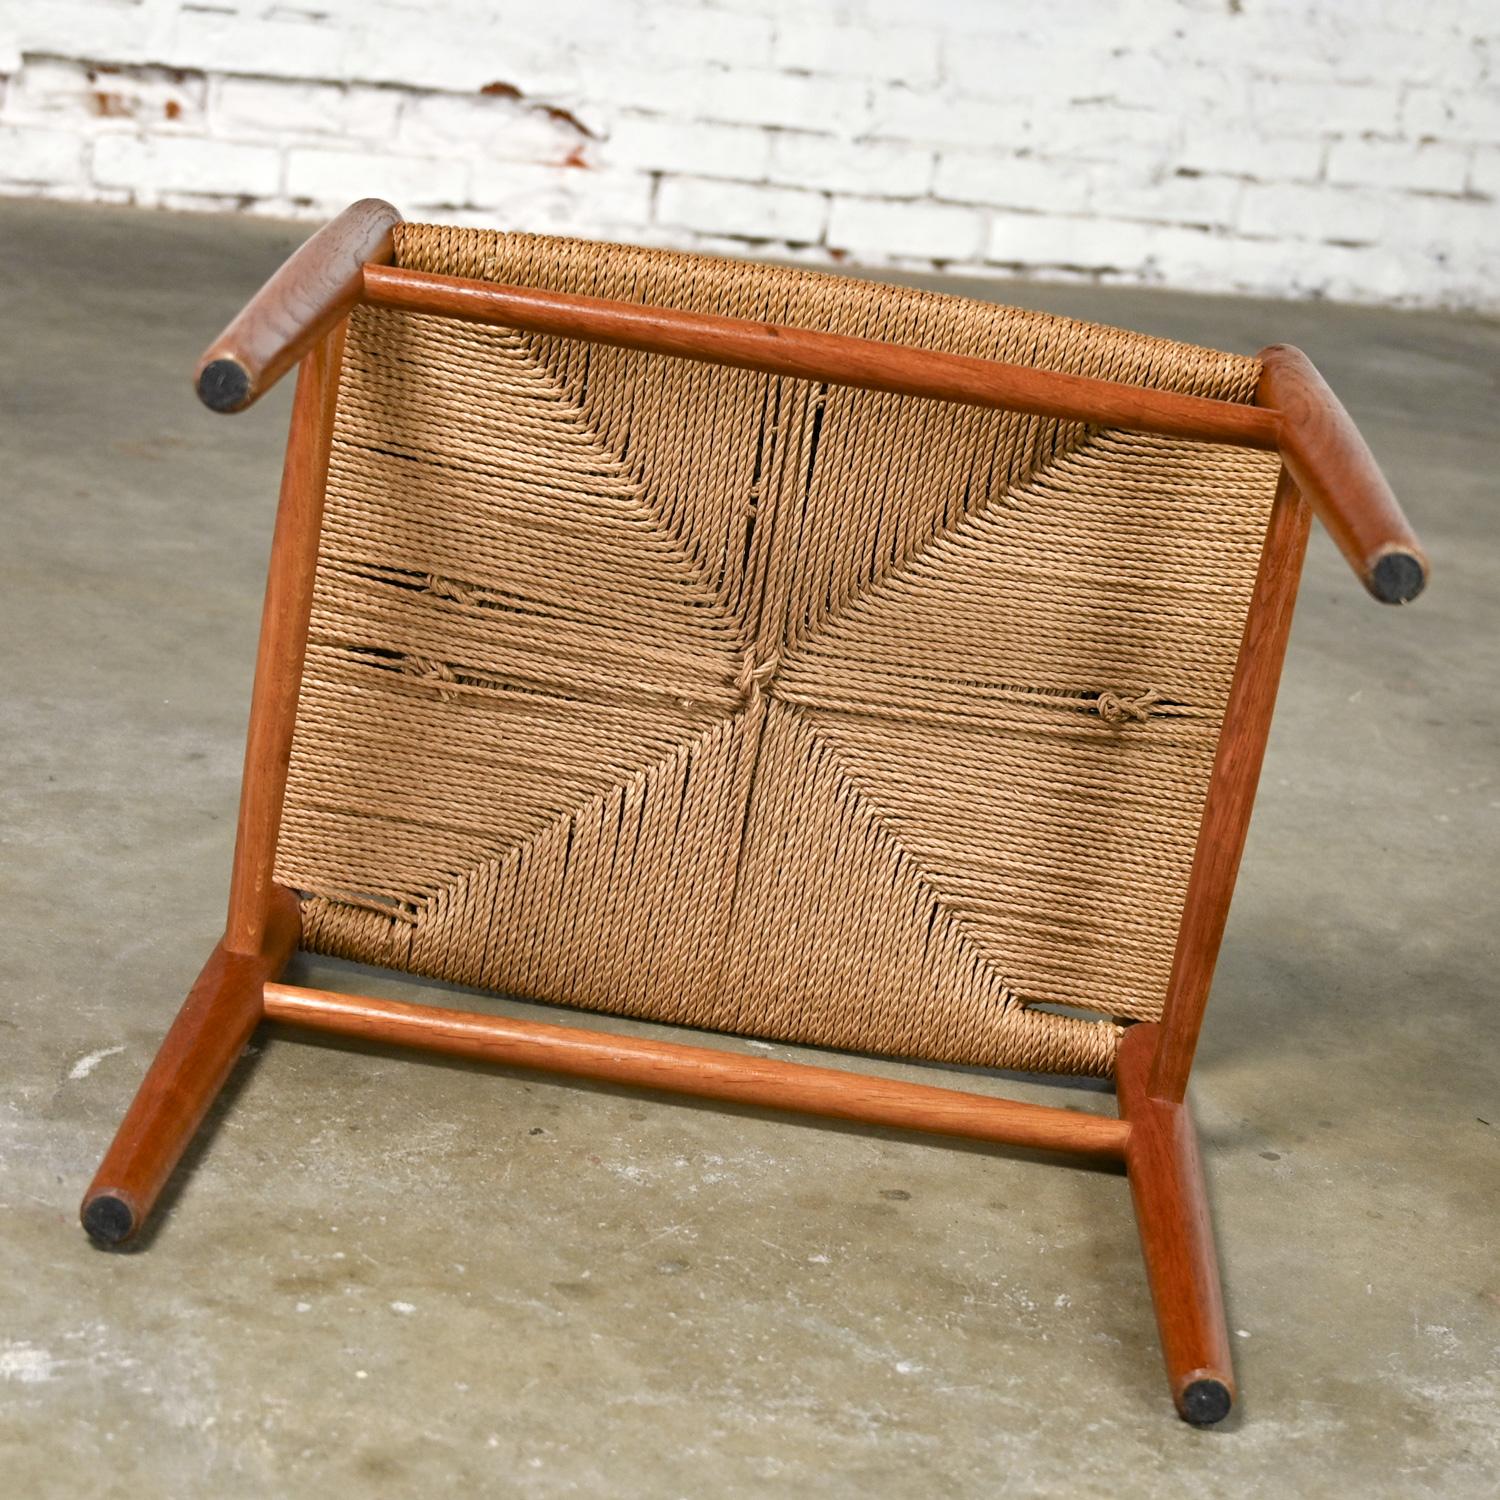 Mid-20th Century Scandinavian Modern Low Stool Teak with Natural Paper Cord Seat 7